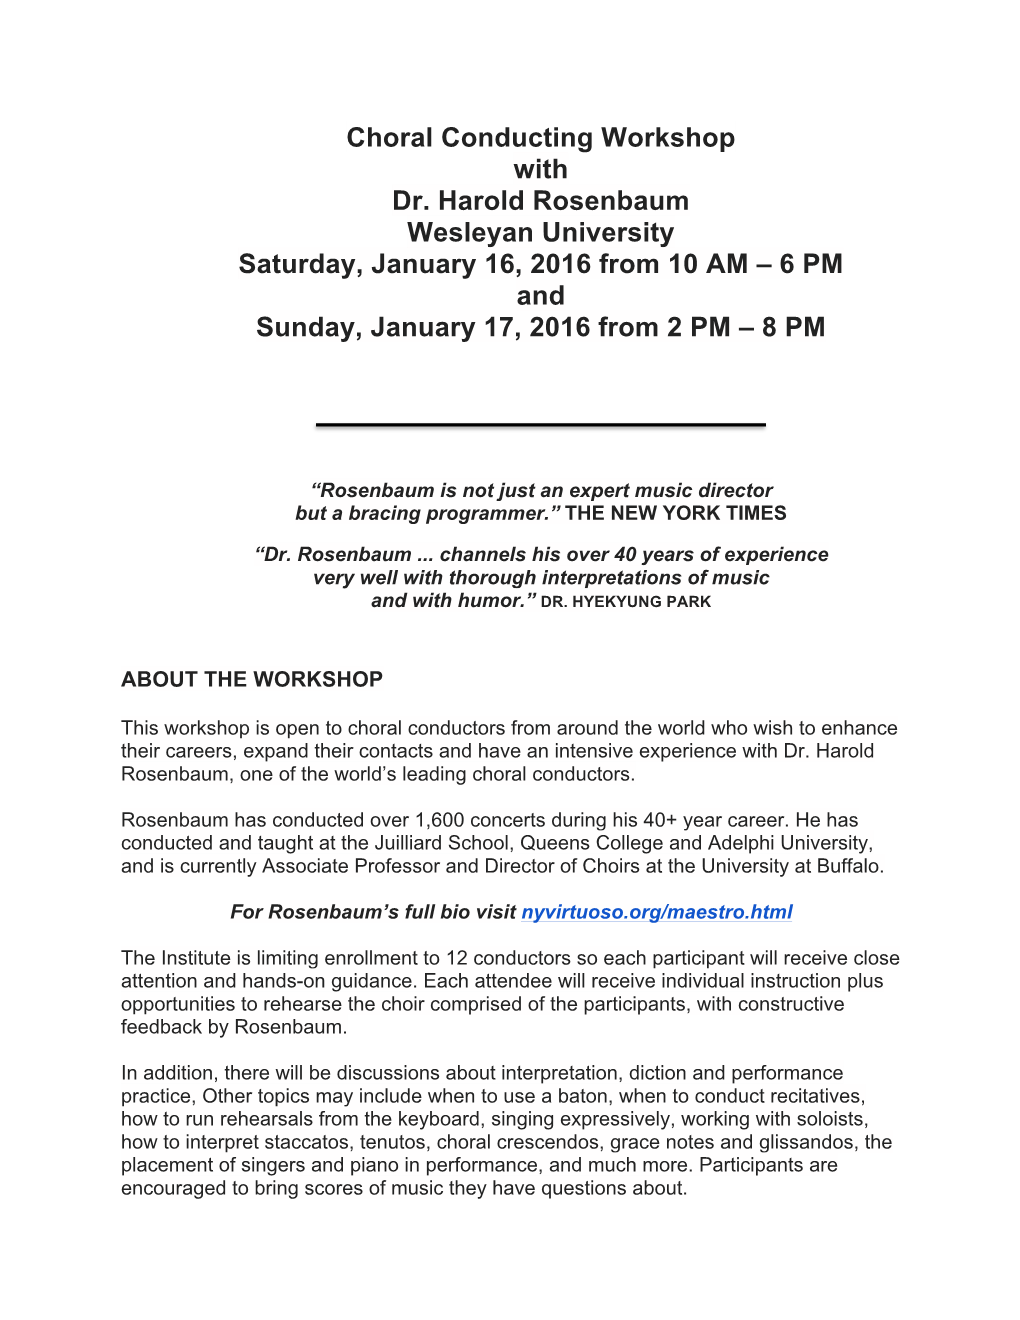 Choral Conducting Workshop with Dr. Harold Rosenbaum Wesleyan University Saturday, January 16, 2016 from 10 AM – 6 PM and Sunday, January 17, 2016 from 2 PM – 8 PM